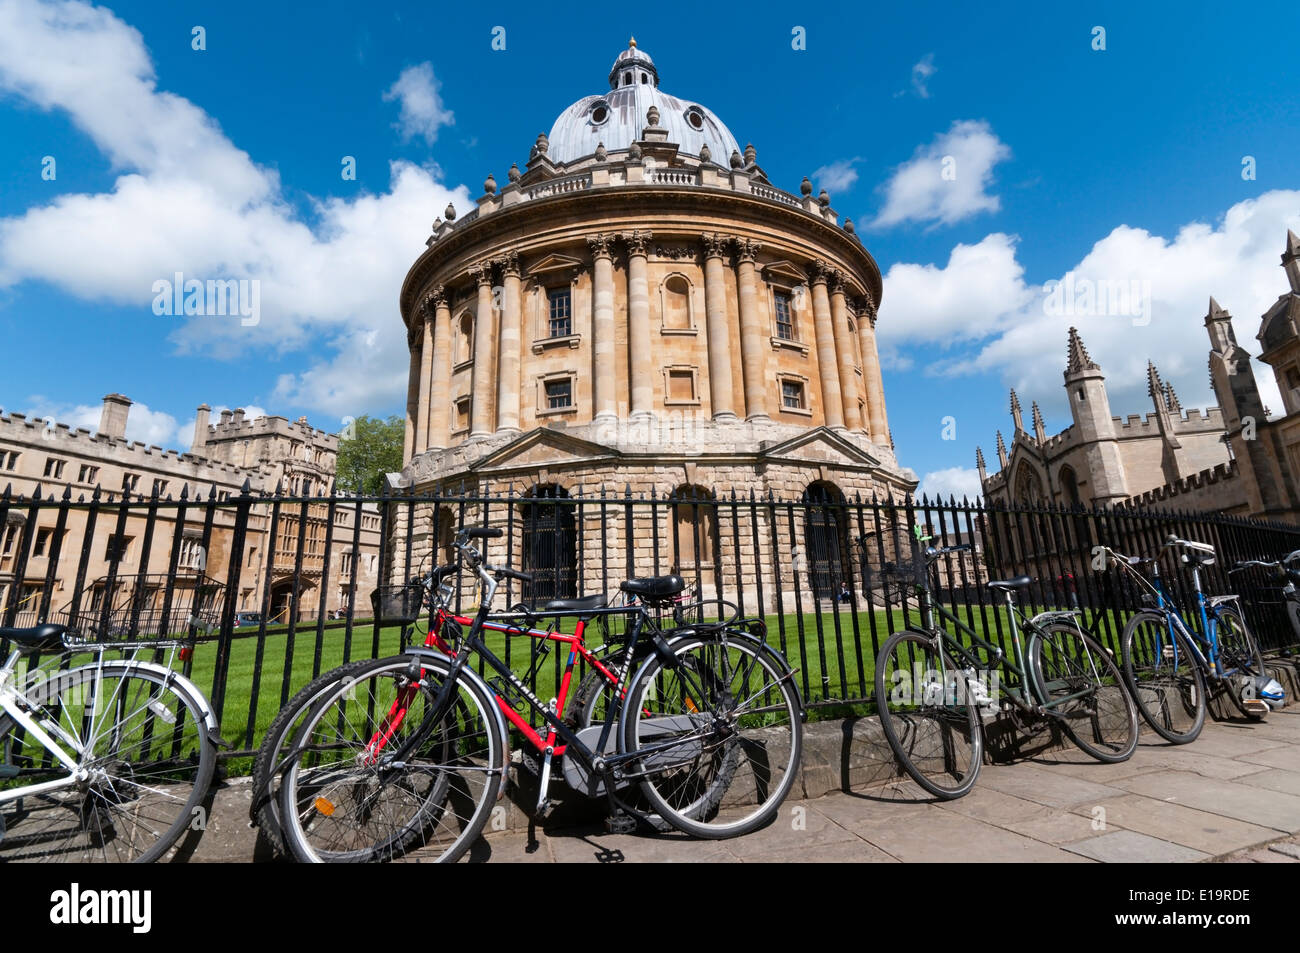 Bicycles chained and leaning against the railings around the Radcliffe Camera in Oxford. Stock Photo